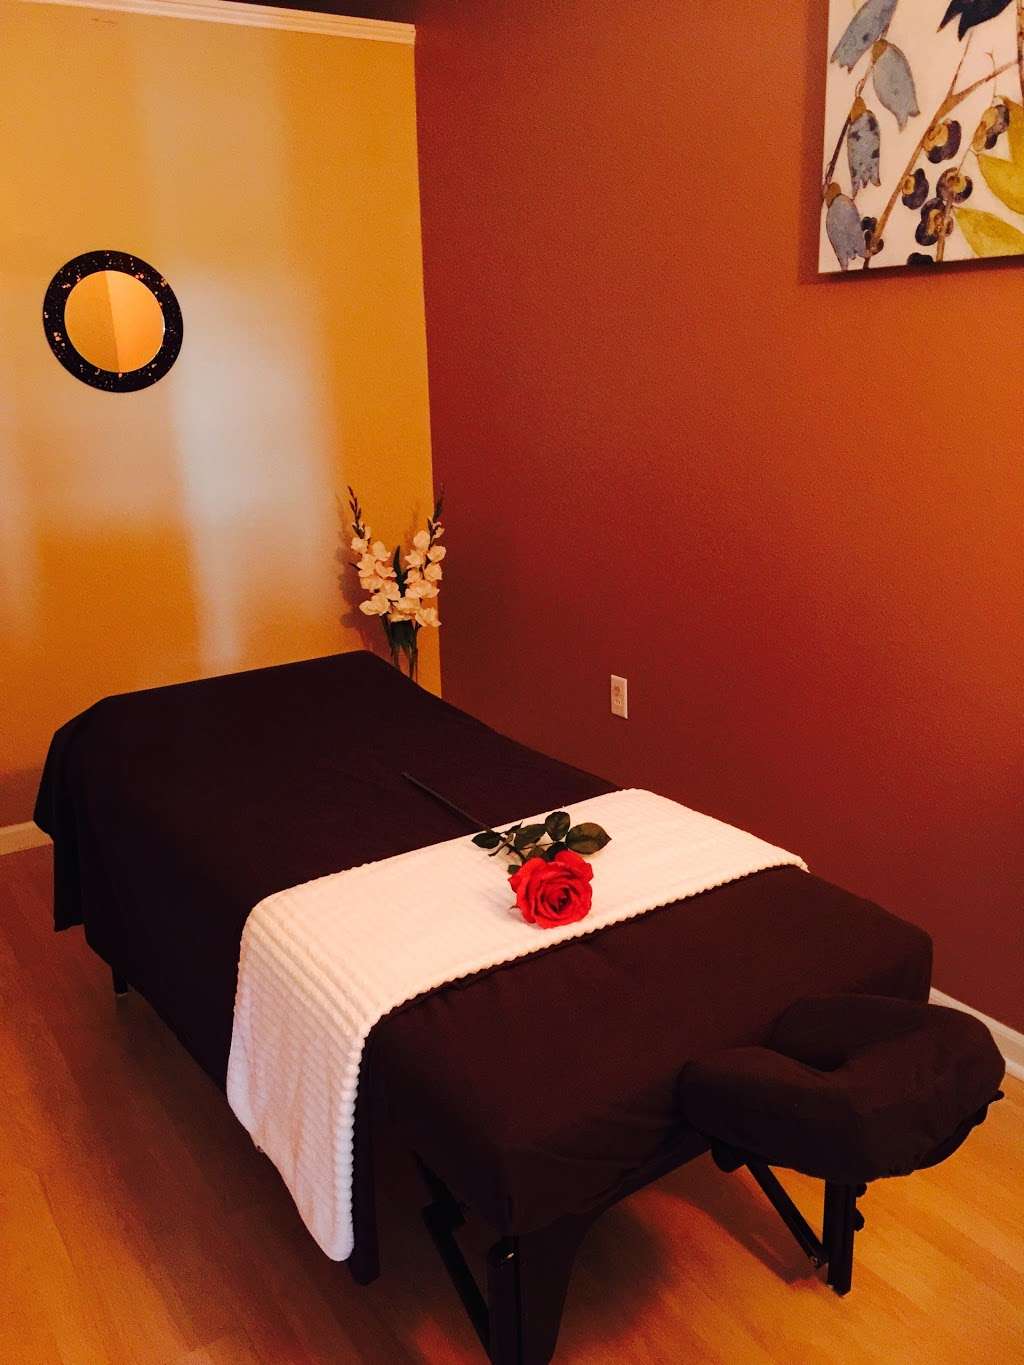 Cicy Spa And Massage | 843 NJ-33 Business UNIT 7, Freehold, NJ 07728 | Phone: (732) 866-0001